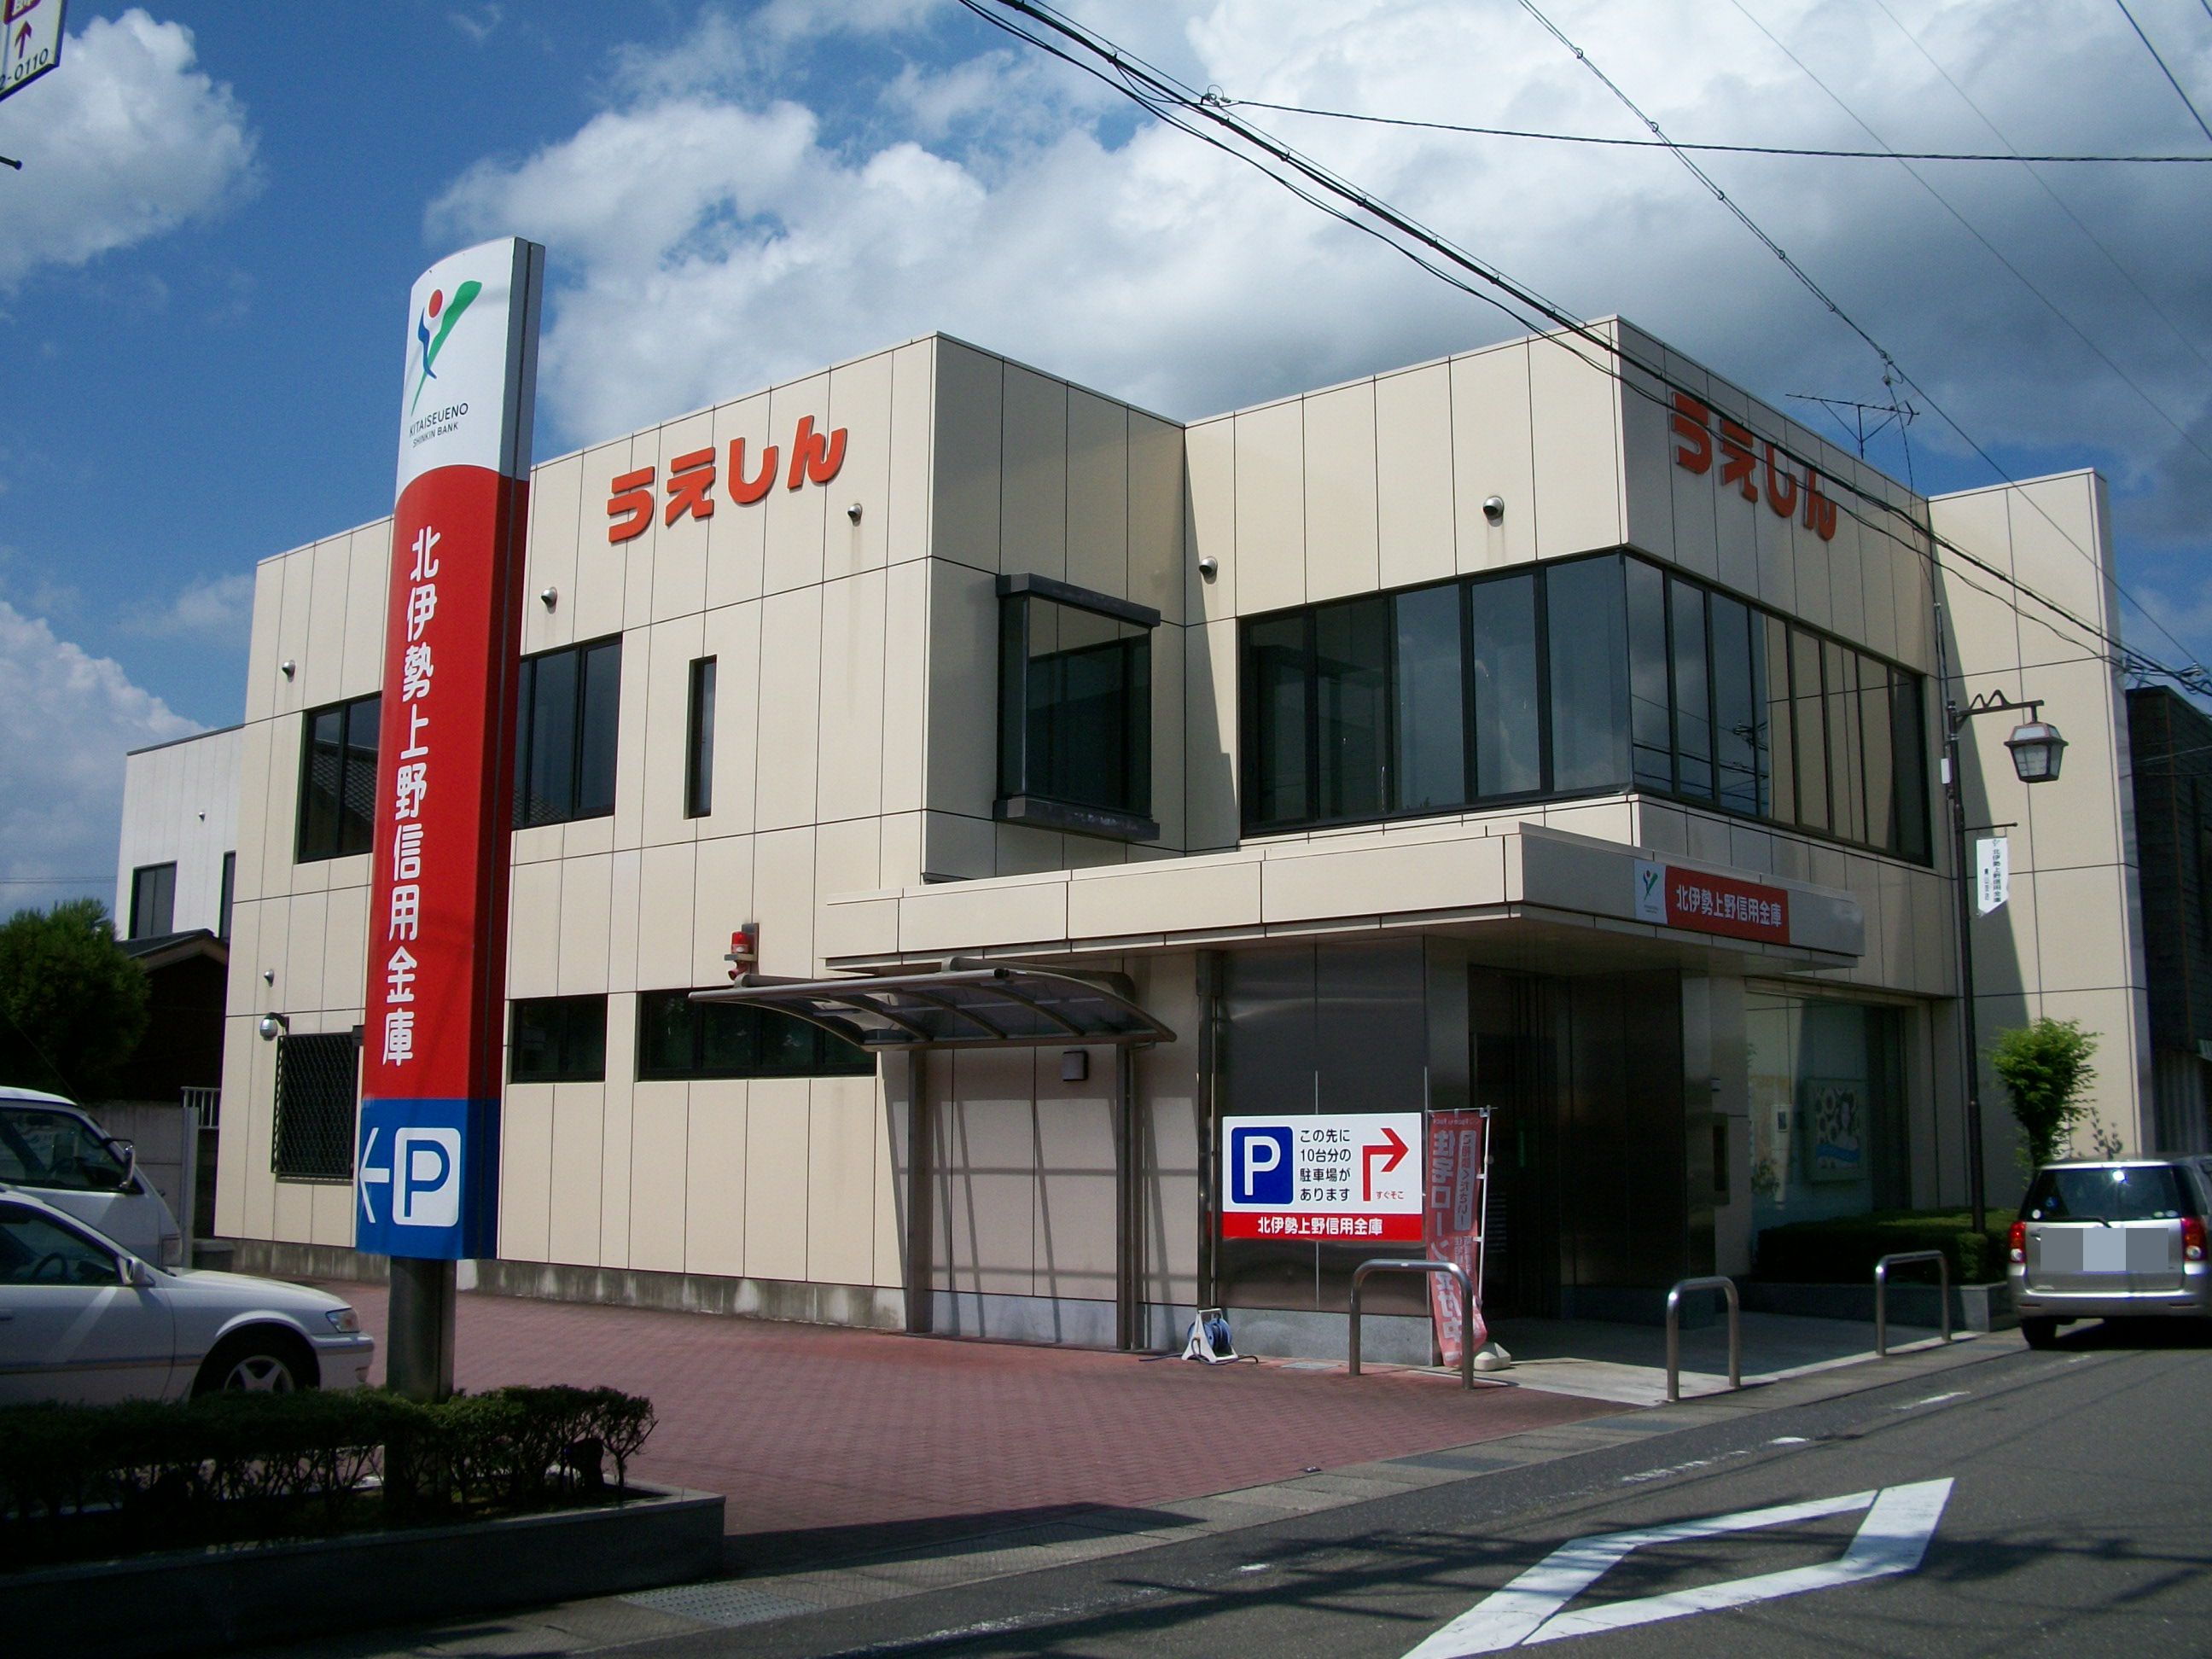 Bank. 1111m to the north Ise Ueno credit union Aoyama Branch (Bank)